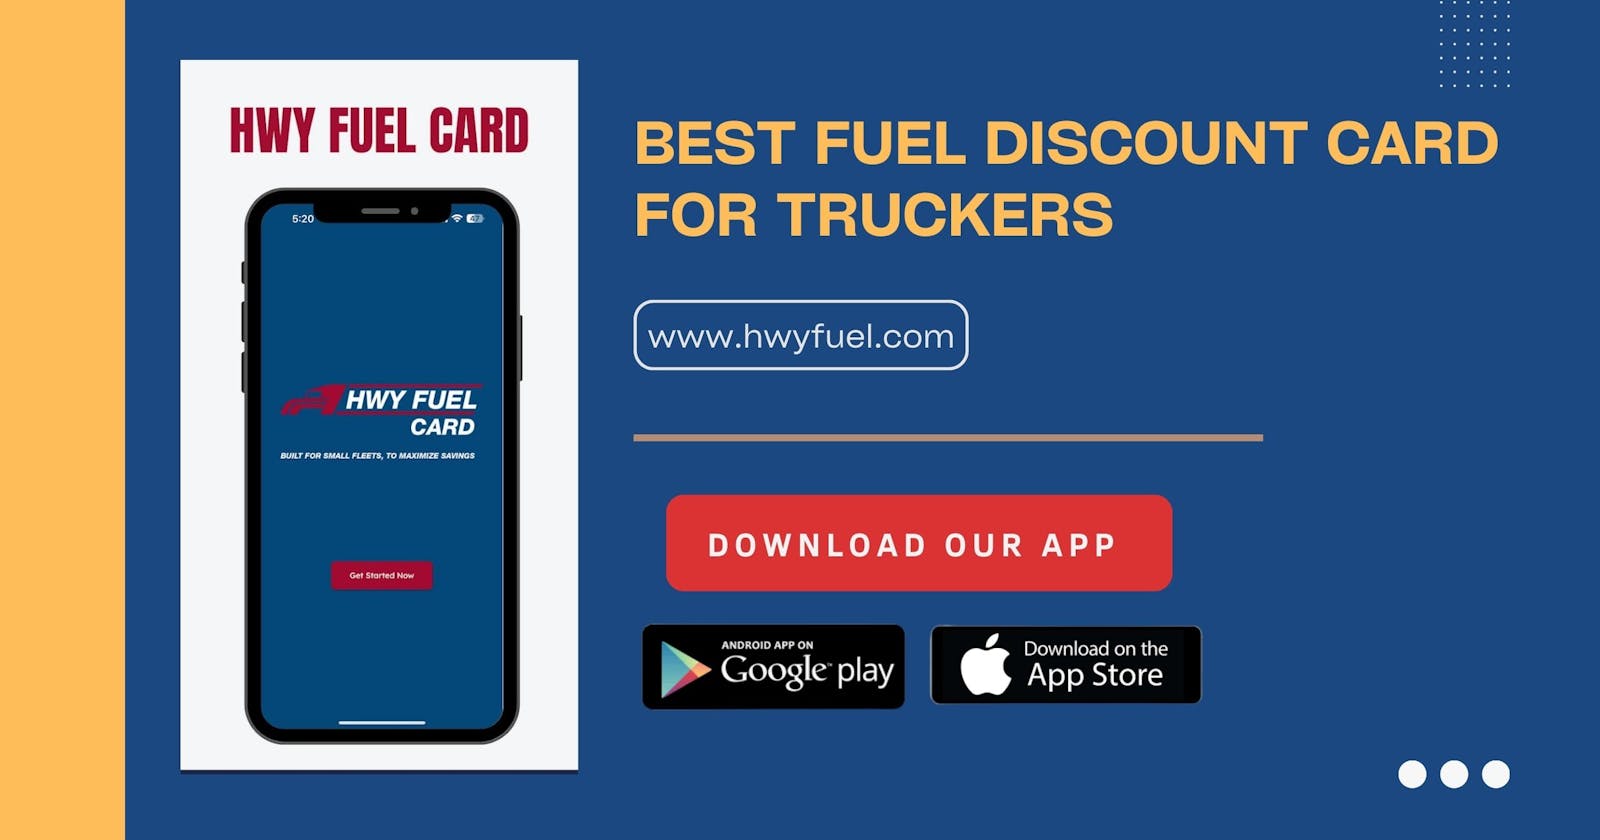 Navigating The Road To Savings: The Best Fuel Discount Card For Truckers